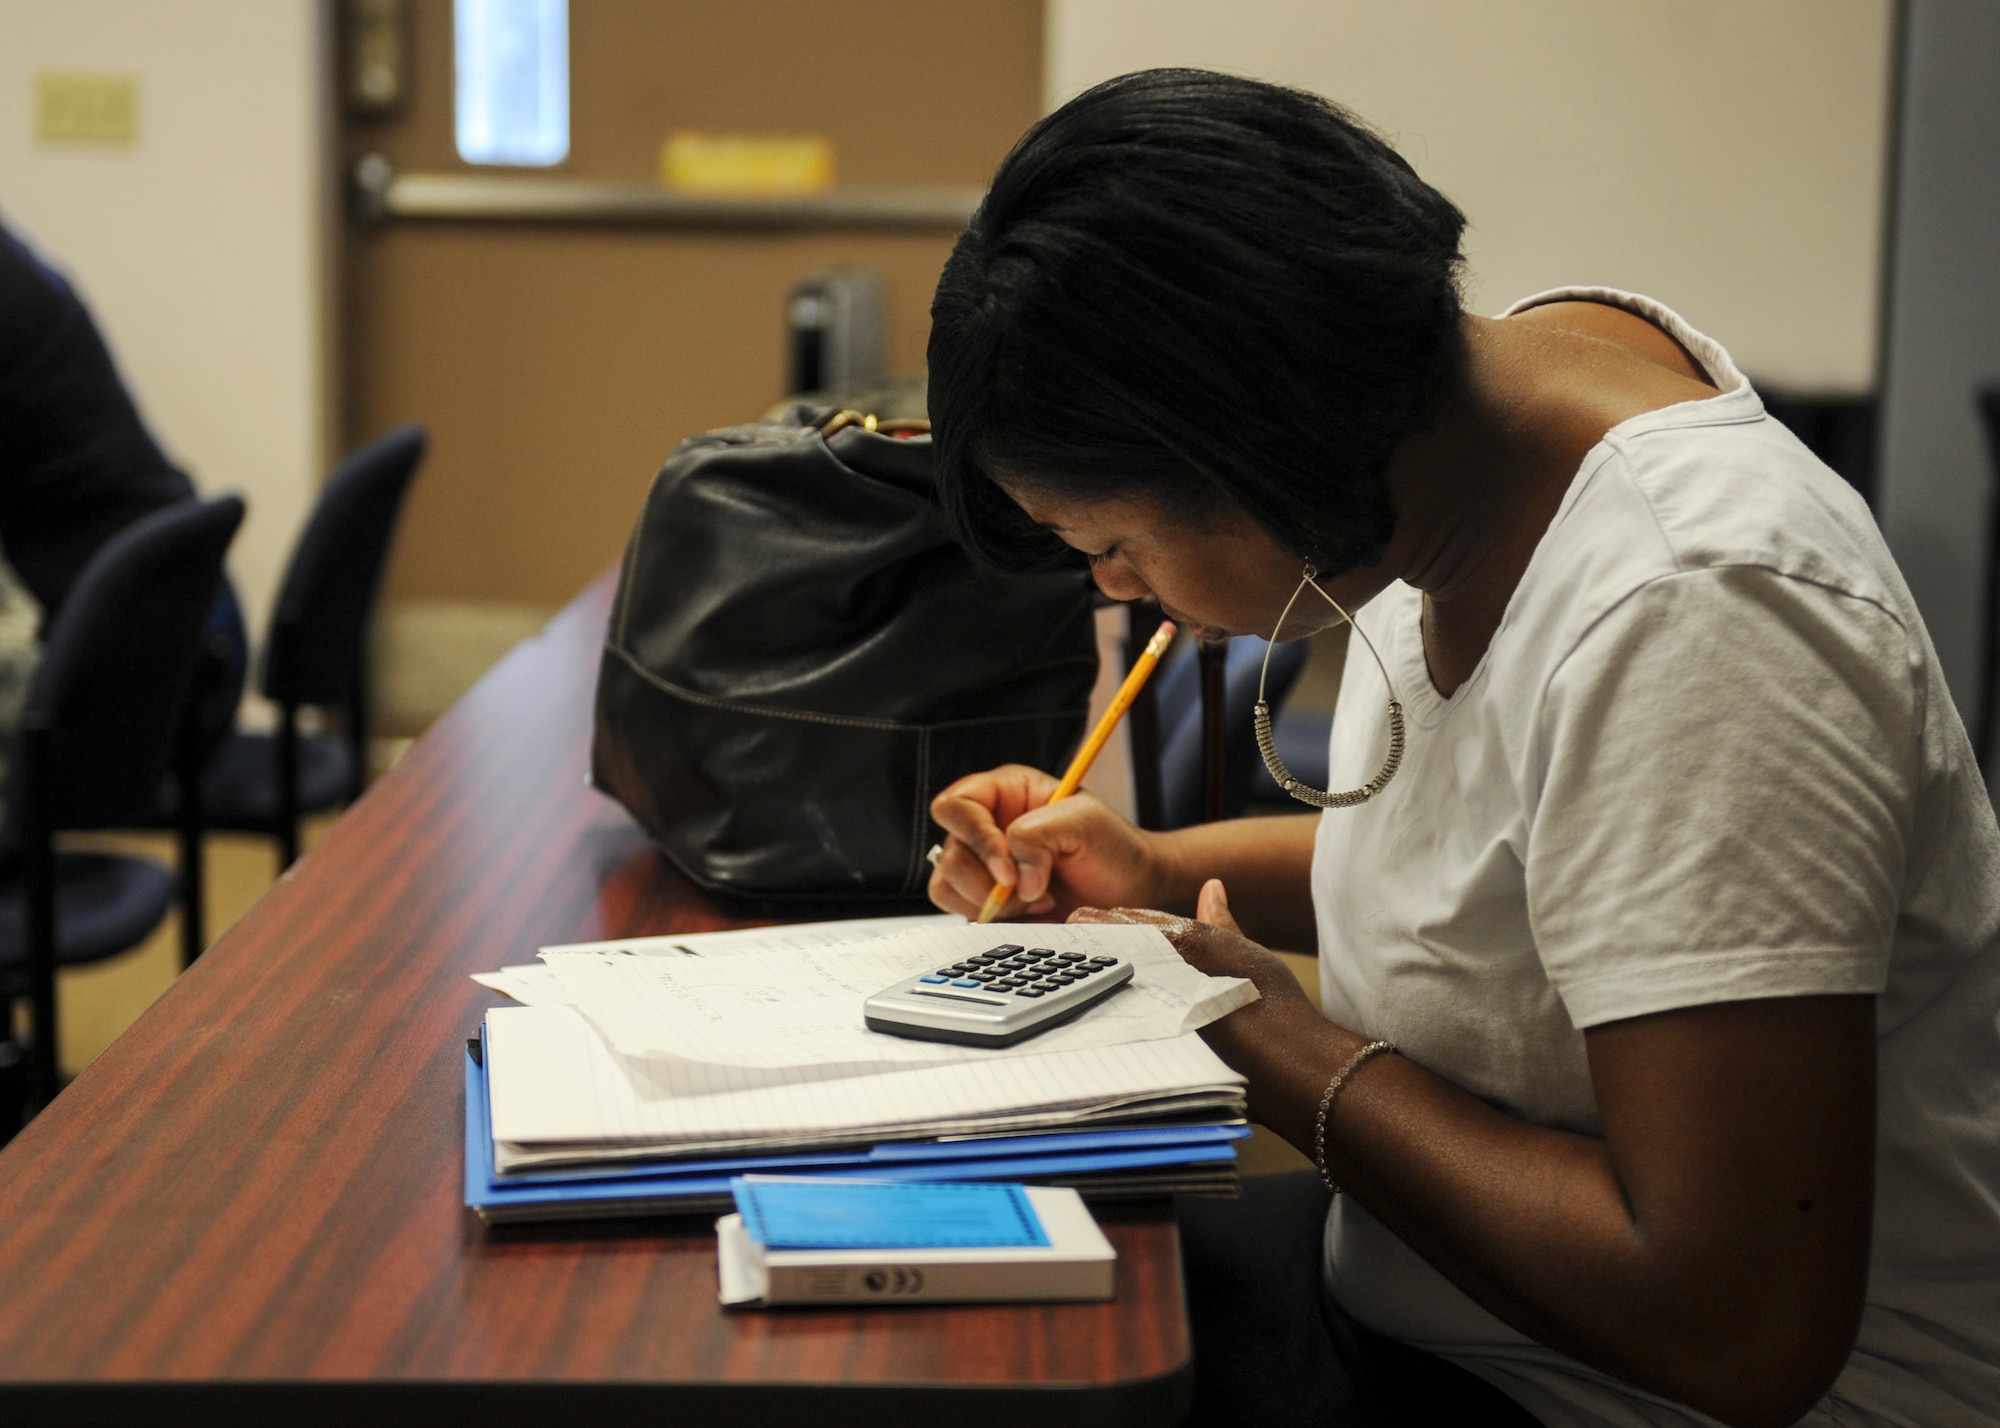 Lashaundra Coad, spouse of U.S. Air Force Master Sgt. Michael Coad, 23d Logistics Readiness Squadron, writes out her expenses during the Financial Lunch and Learn at Moody Air Force Base, Ga., March 21, 2013. During the class, students were given tools to help them reach their financial goals. (U.S. Air Force photo by Airman 1st Class Olivia Bumpers/Released)